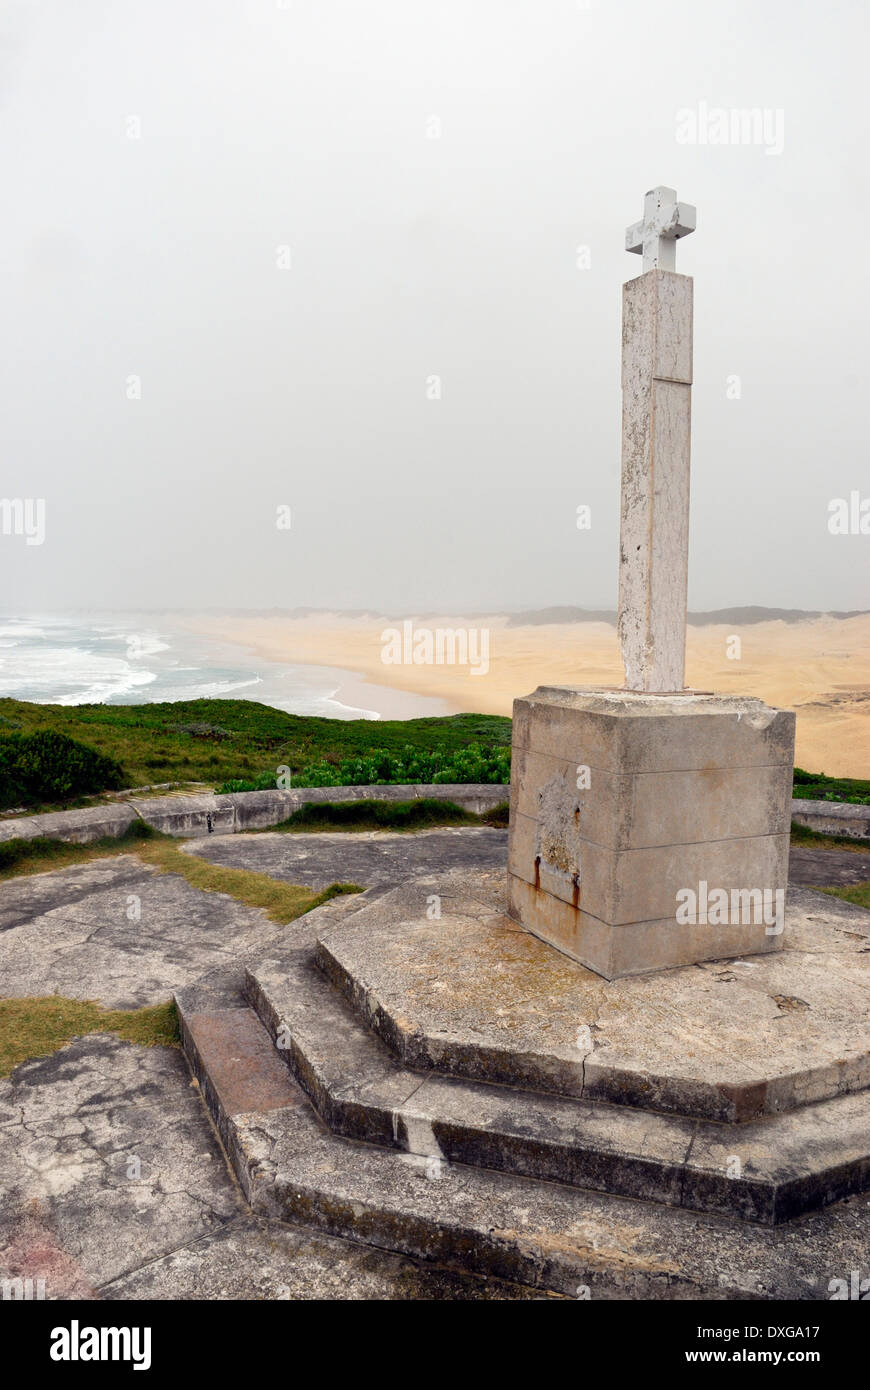 The Diaz Cross (replica) erected by Bartolomeu Dias in 1488, between Bushmans River mouth and Boknes, Eastern Cape, South Africa Stock Photo